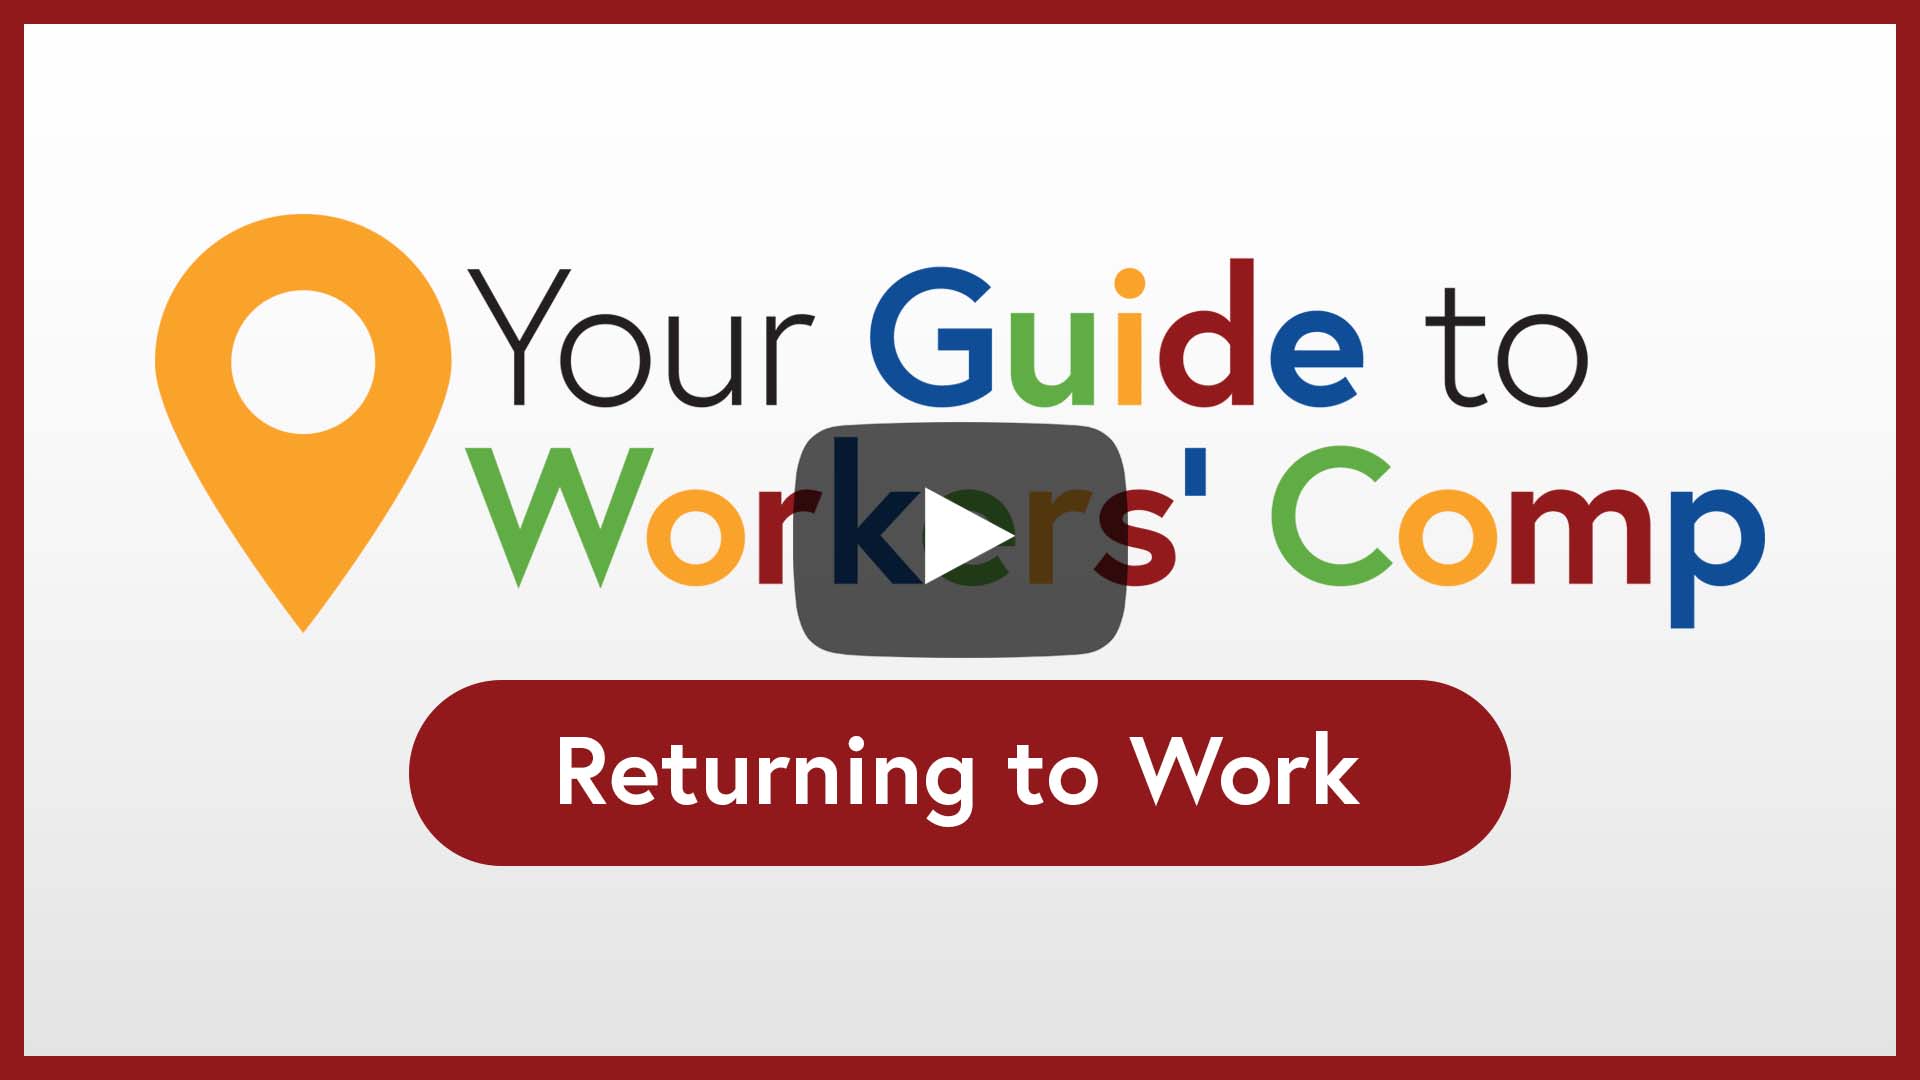 Your Guide to Workers' Comp - Return to Work